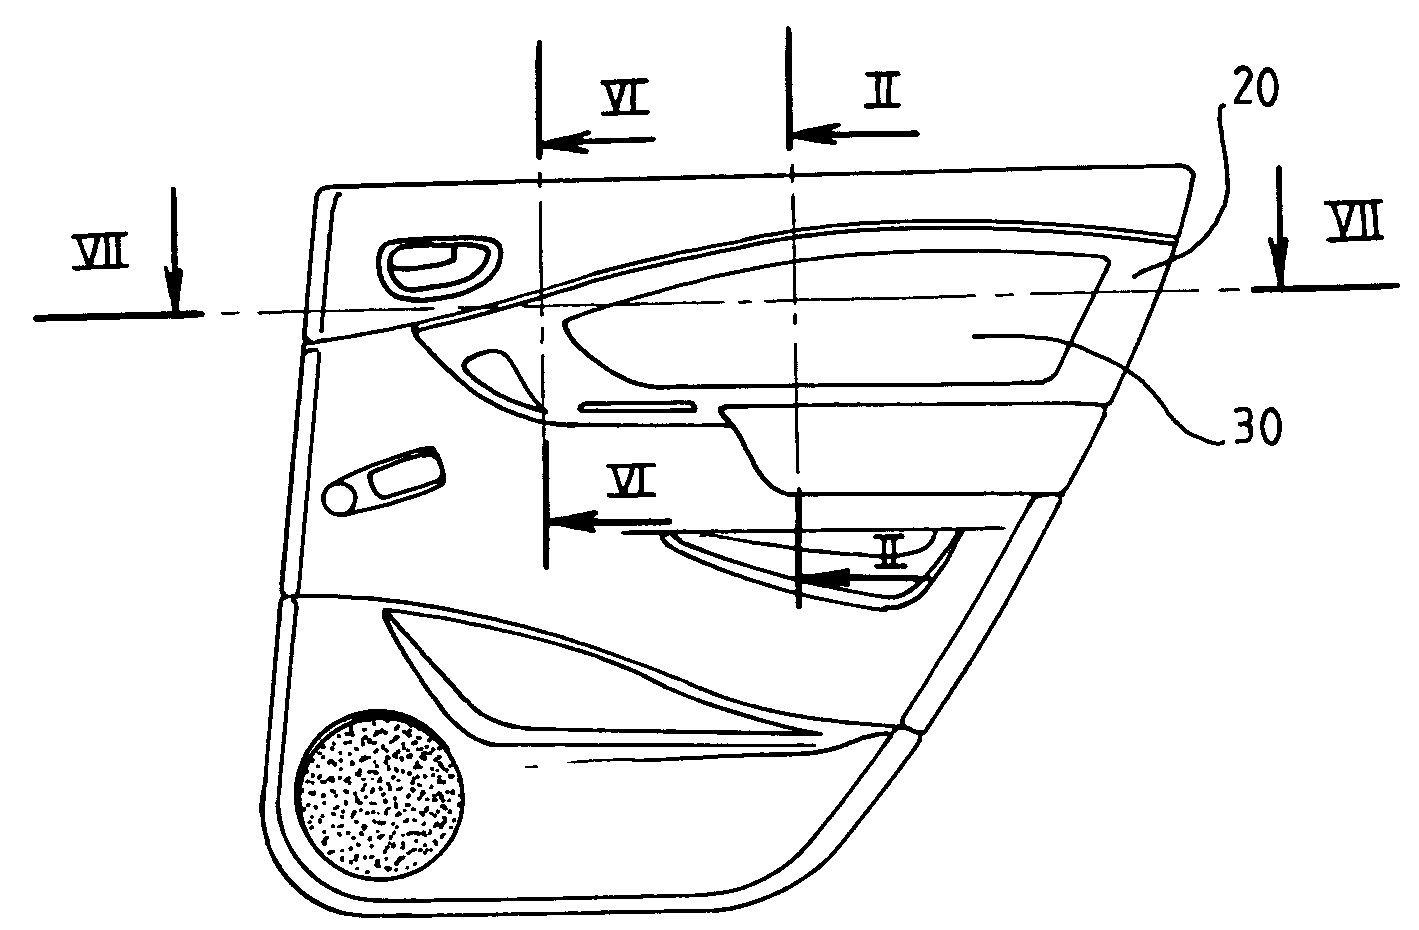 Enclosure part for automotive vehicles, with a panel suitable for concealing an inflatable airbag